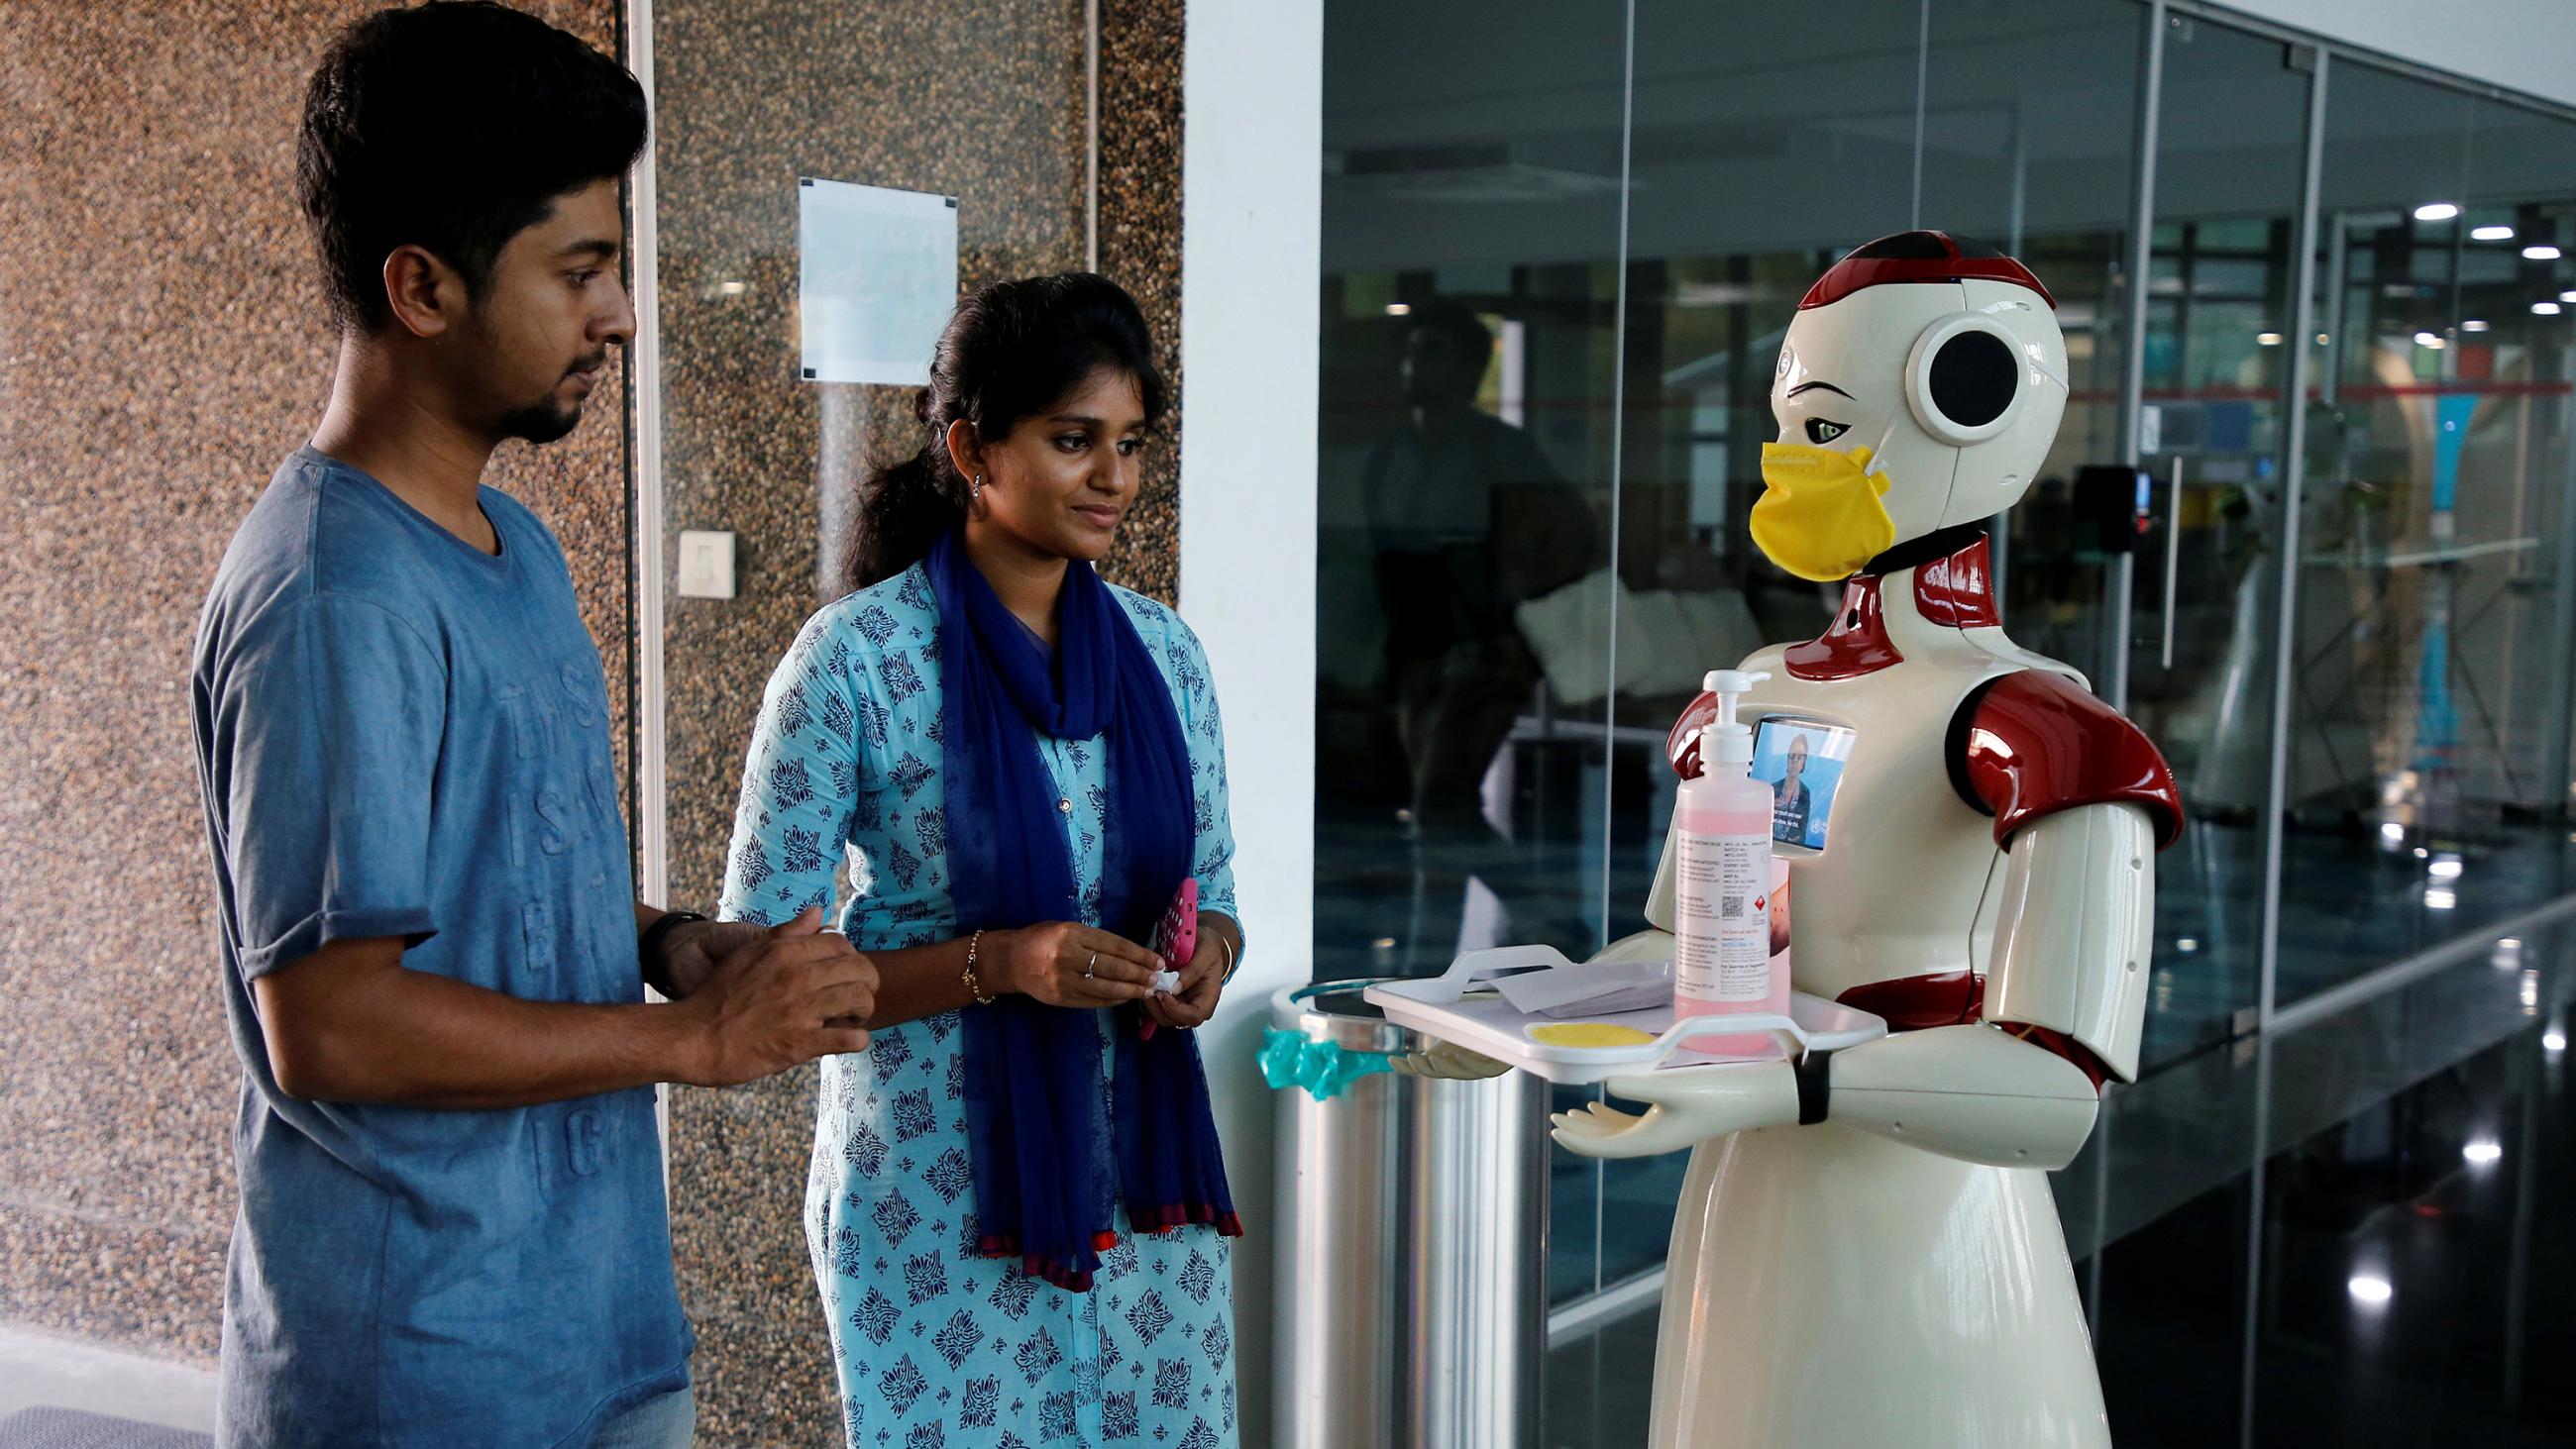 The photo shows two people smiling as they interact with the large, slick robot. 